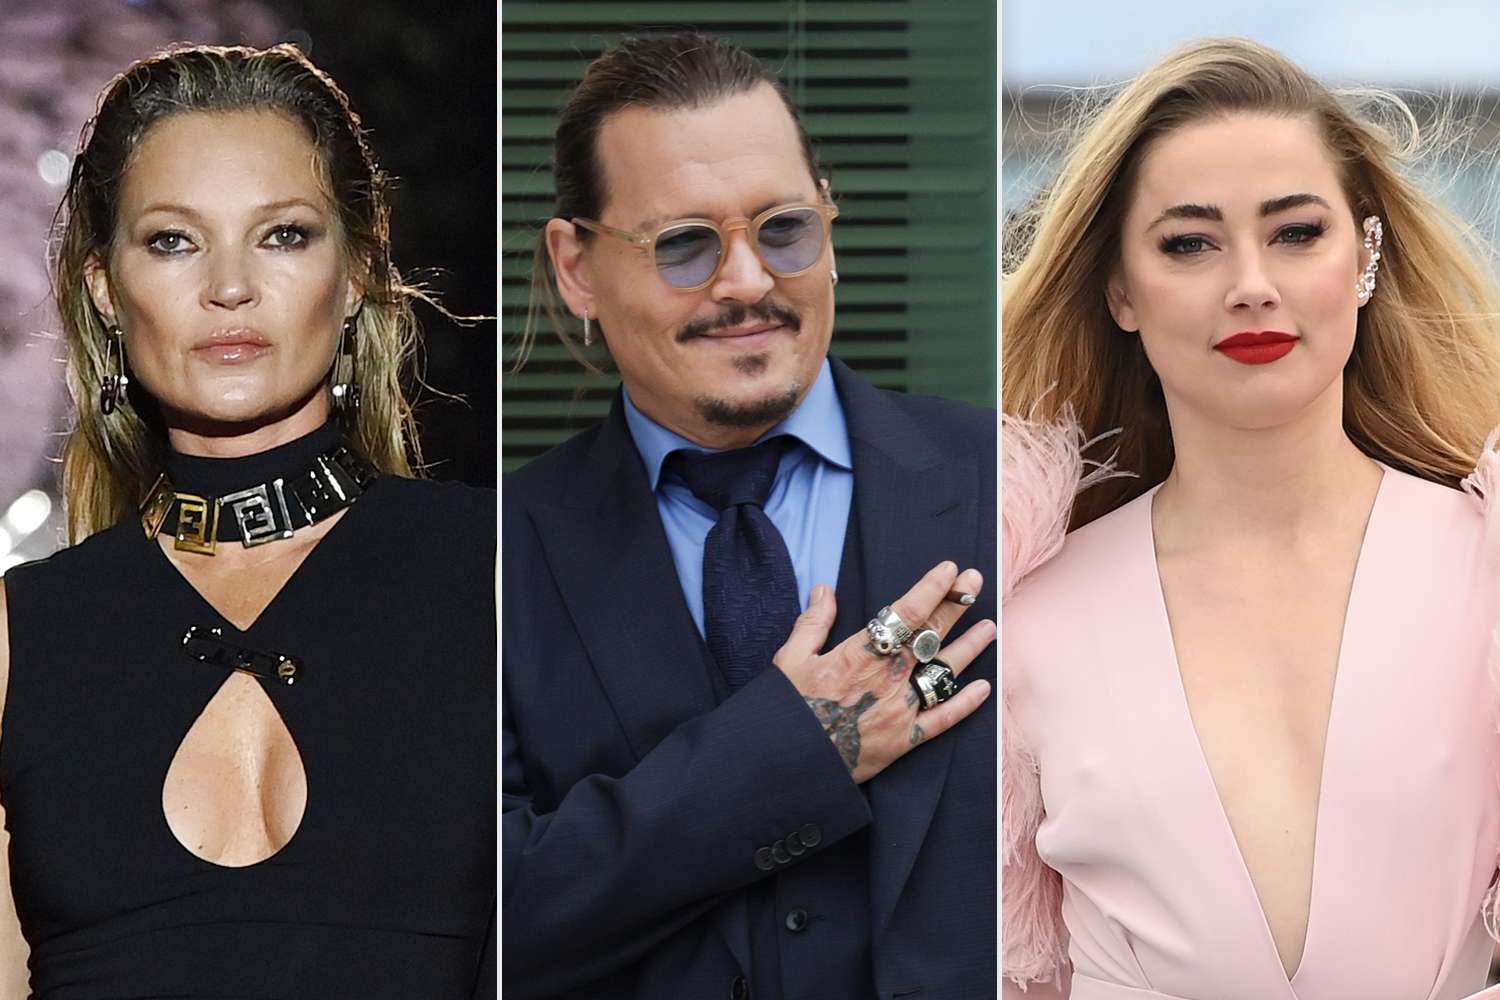 kate-moss-explains-why-she-testified-in-johnny-depp-and-amber-heard-trial-i-had-to-say-the-truth